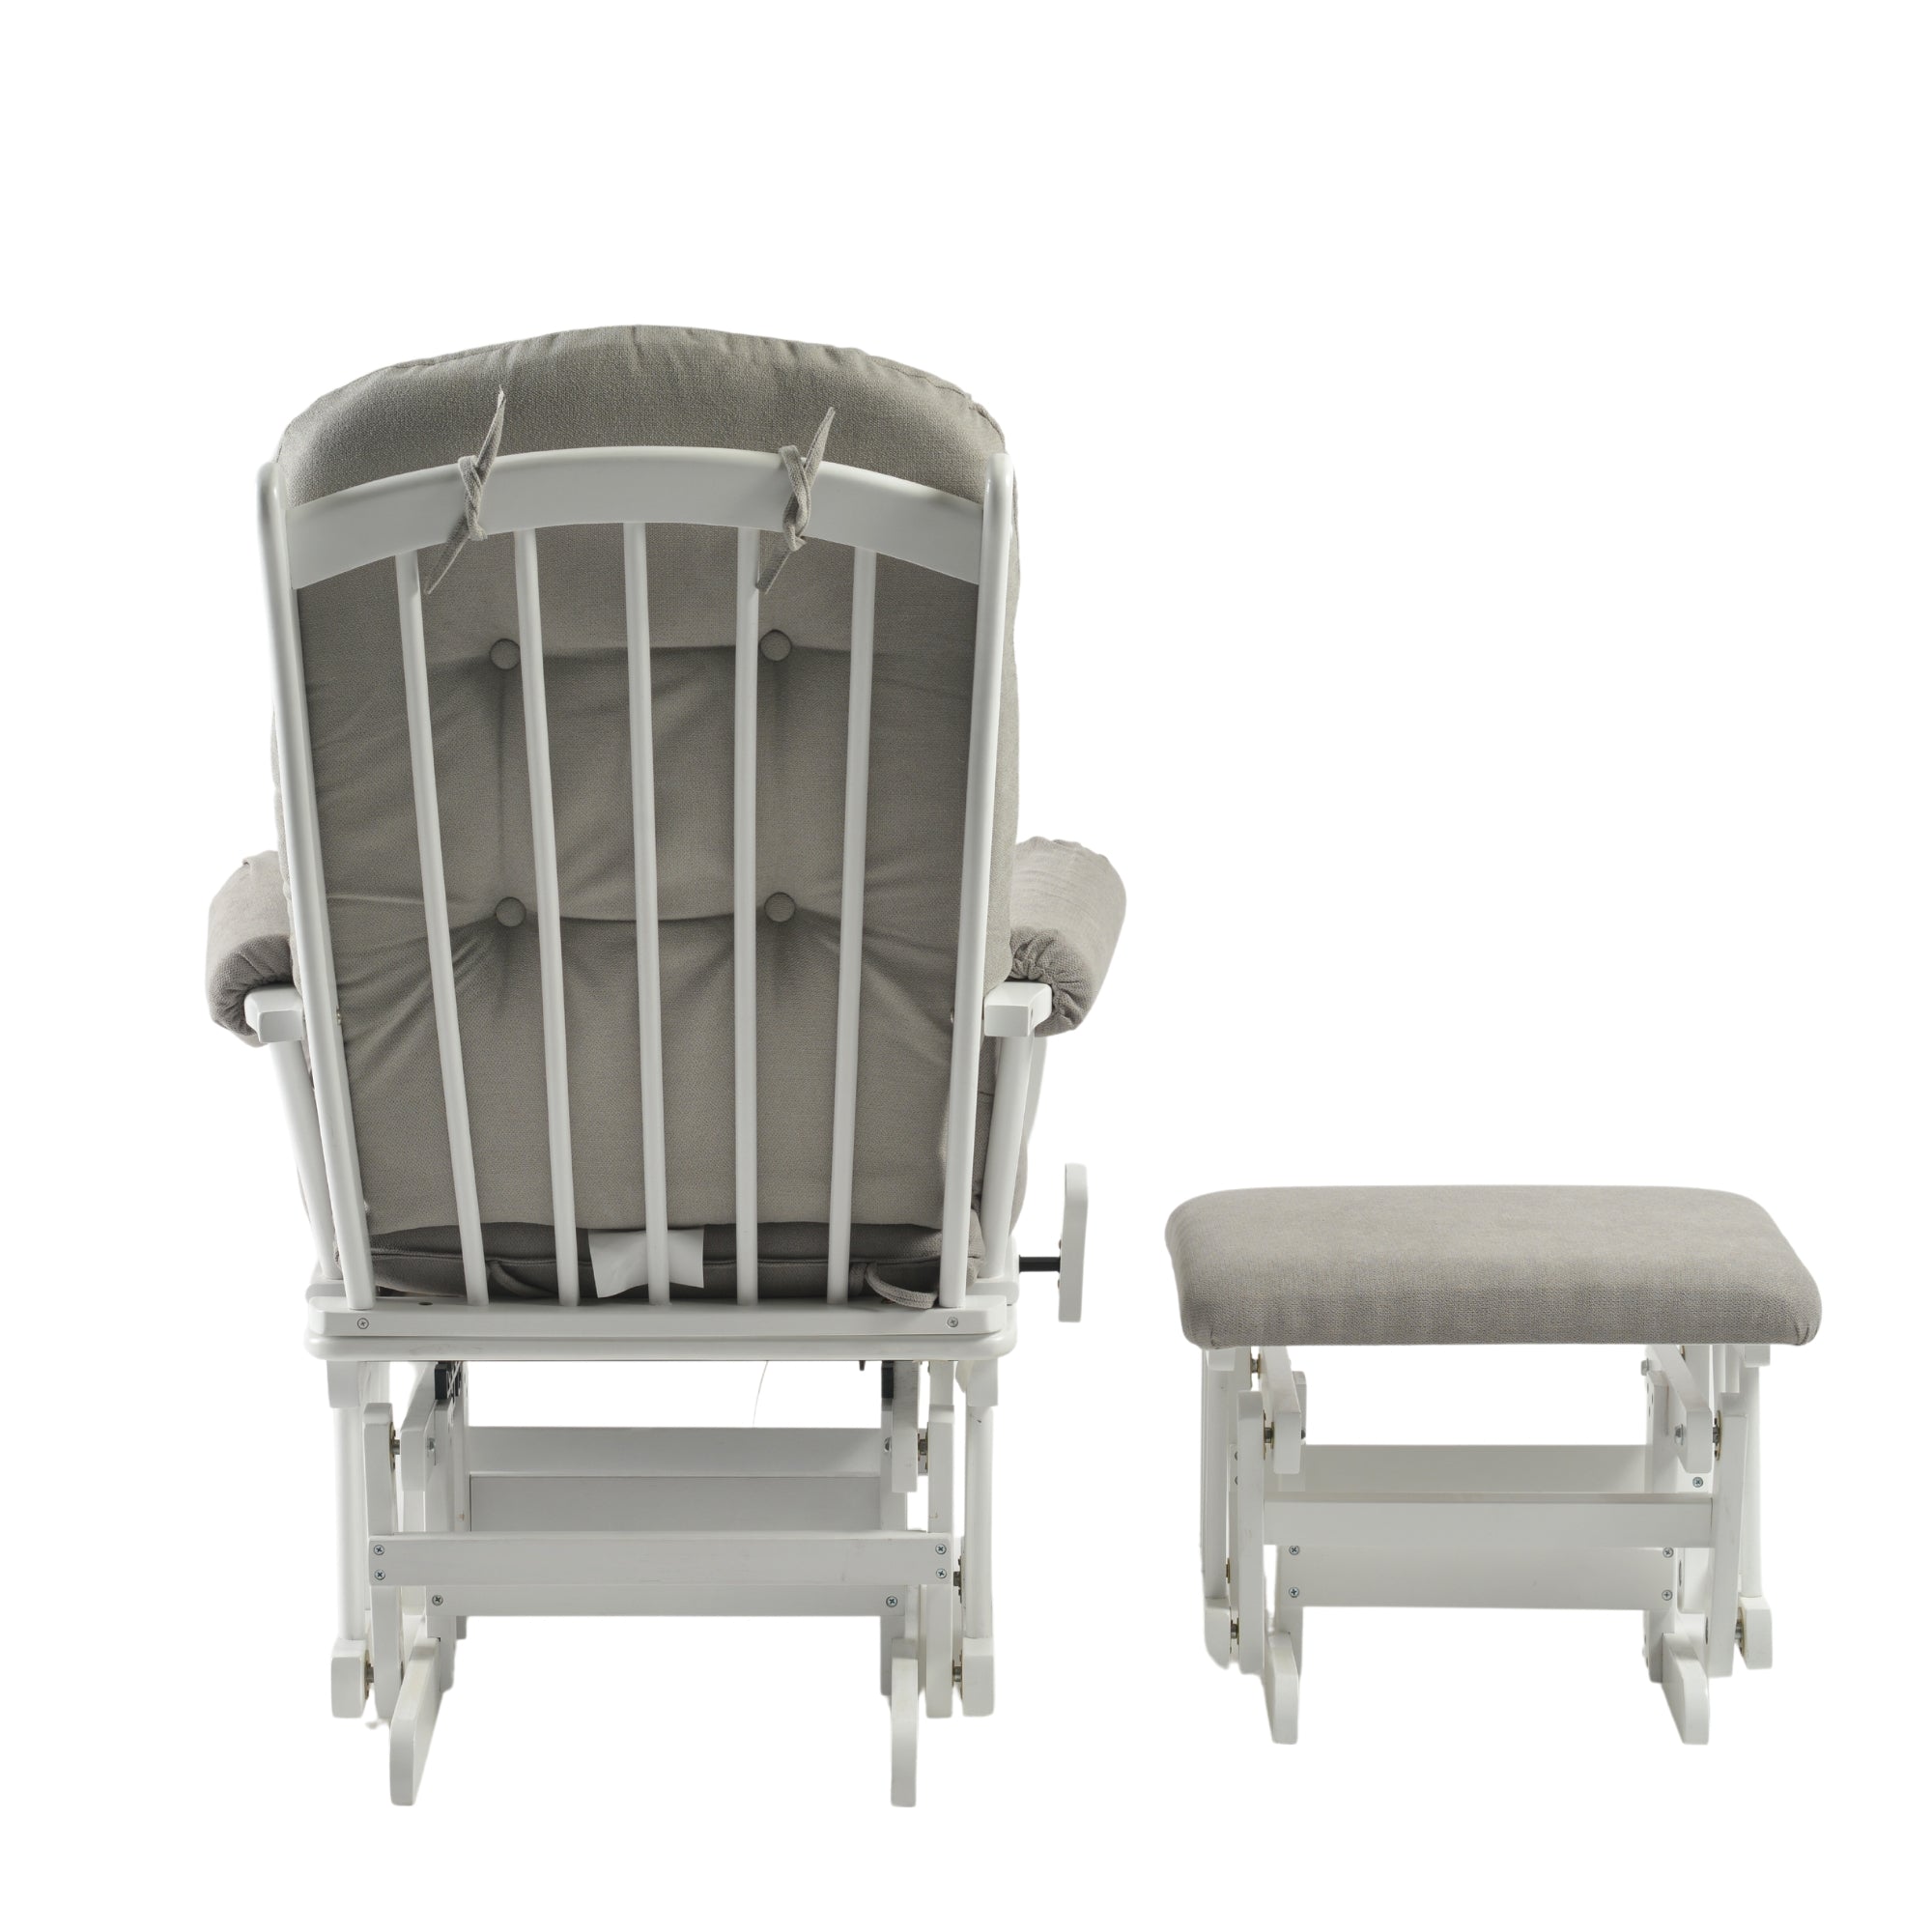 50% OFF - Kielder Nursing Chair and Footstool - Pebble Stone & White. LIMITED EDITION